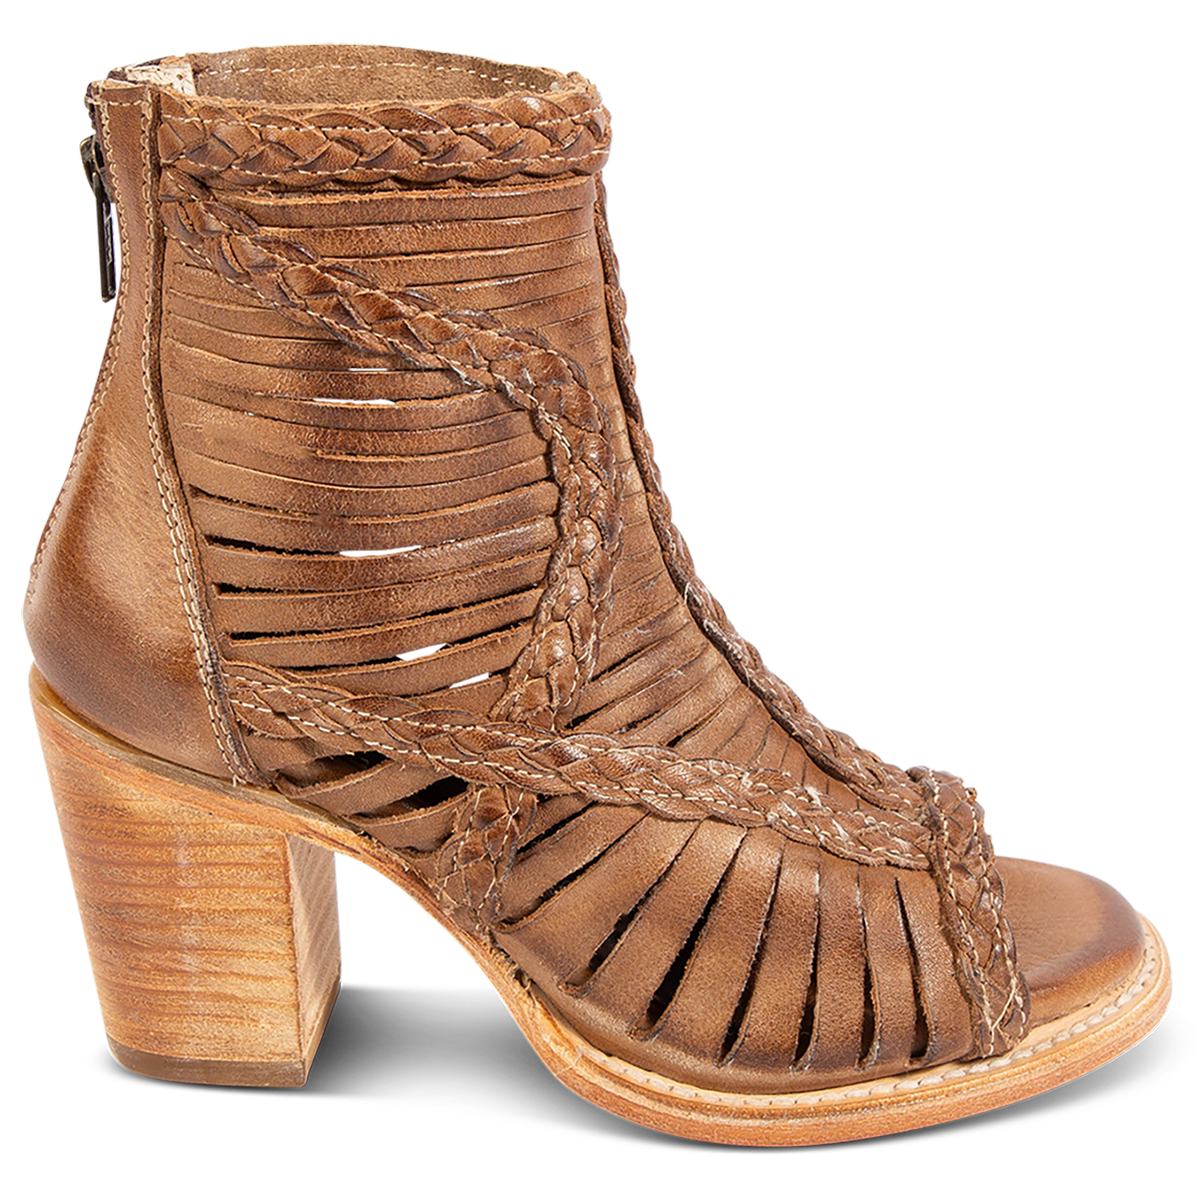 FREEBIRD women's Bela wheat leather sandal with laser cut leather, braided accents and a working brass zip closure